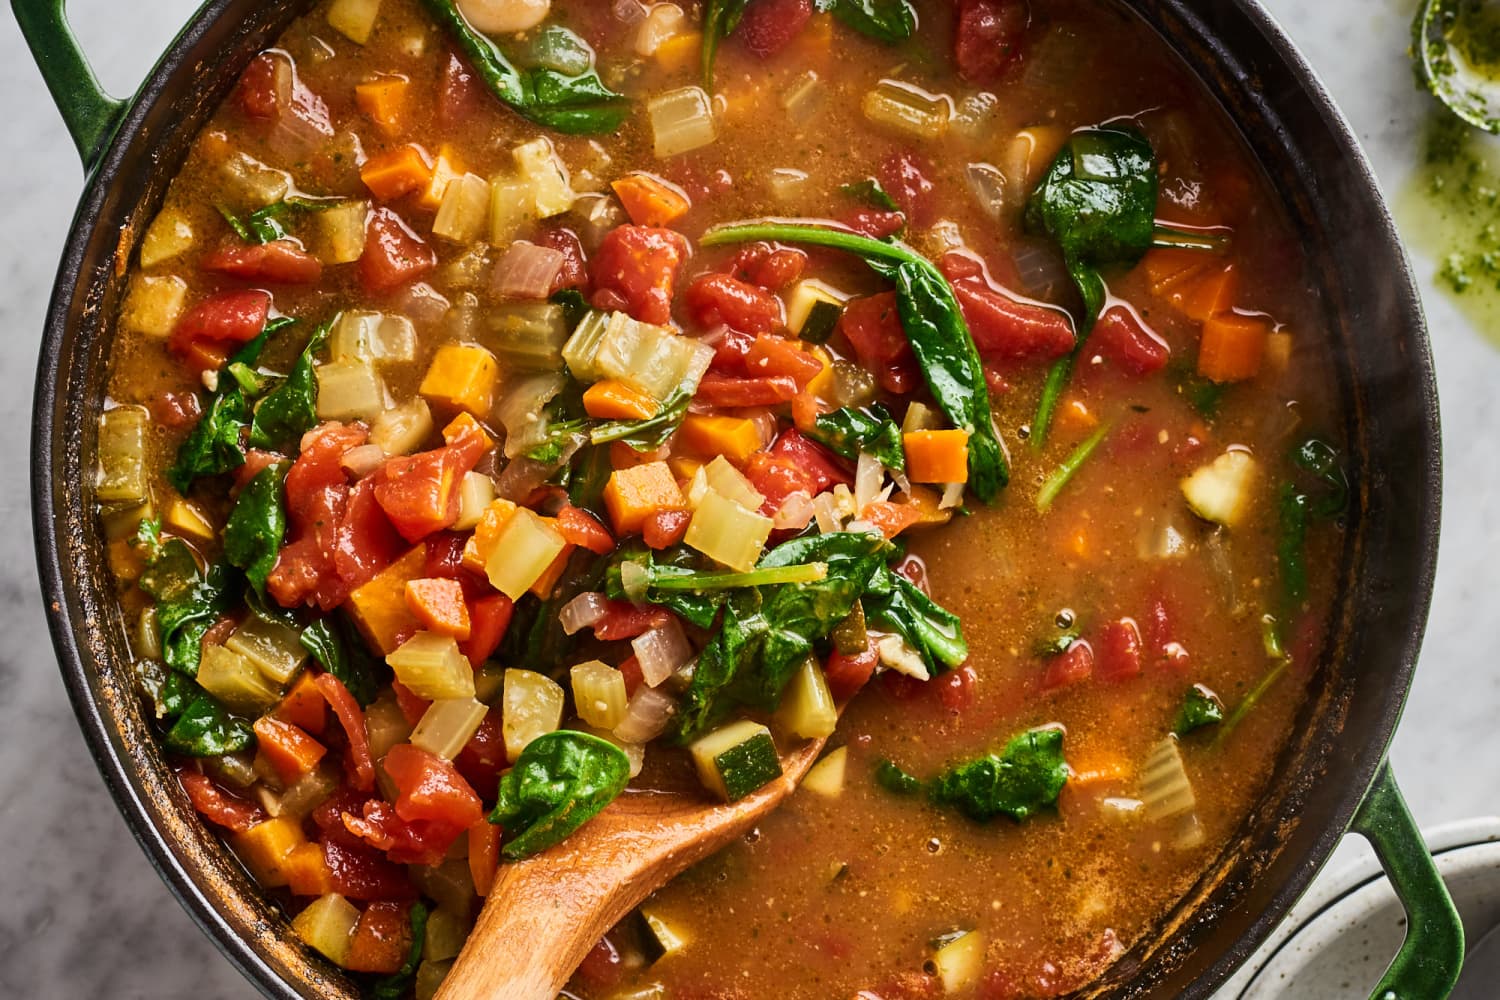 https://cdn.apartmenttherapy.info/image/upload/f_auto,q_auto:eco,c_fill,g_auto,w_1500,ar_3:2/k%2FPhoto%2FRecipes%2F2019-12-How-To-Classic-Minestrone-Soup%2FHT-Classic-Minestrone-Soup_035